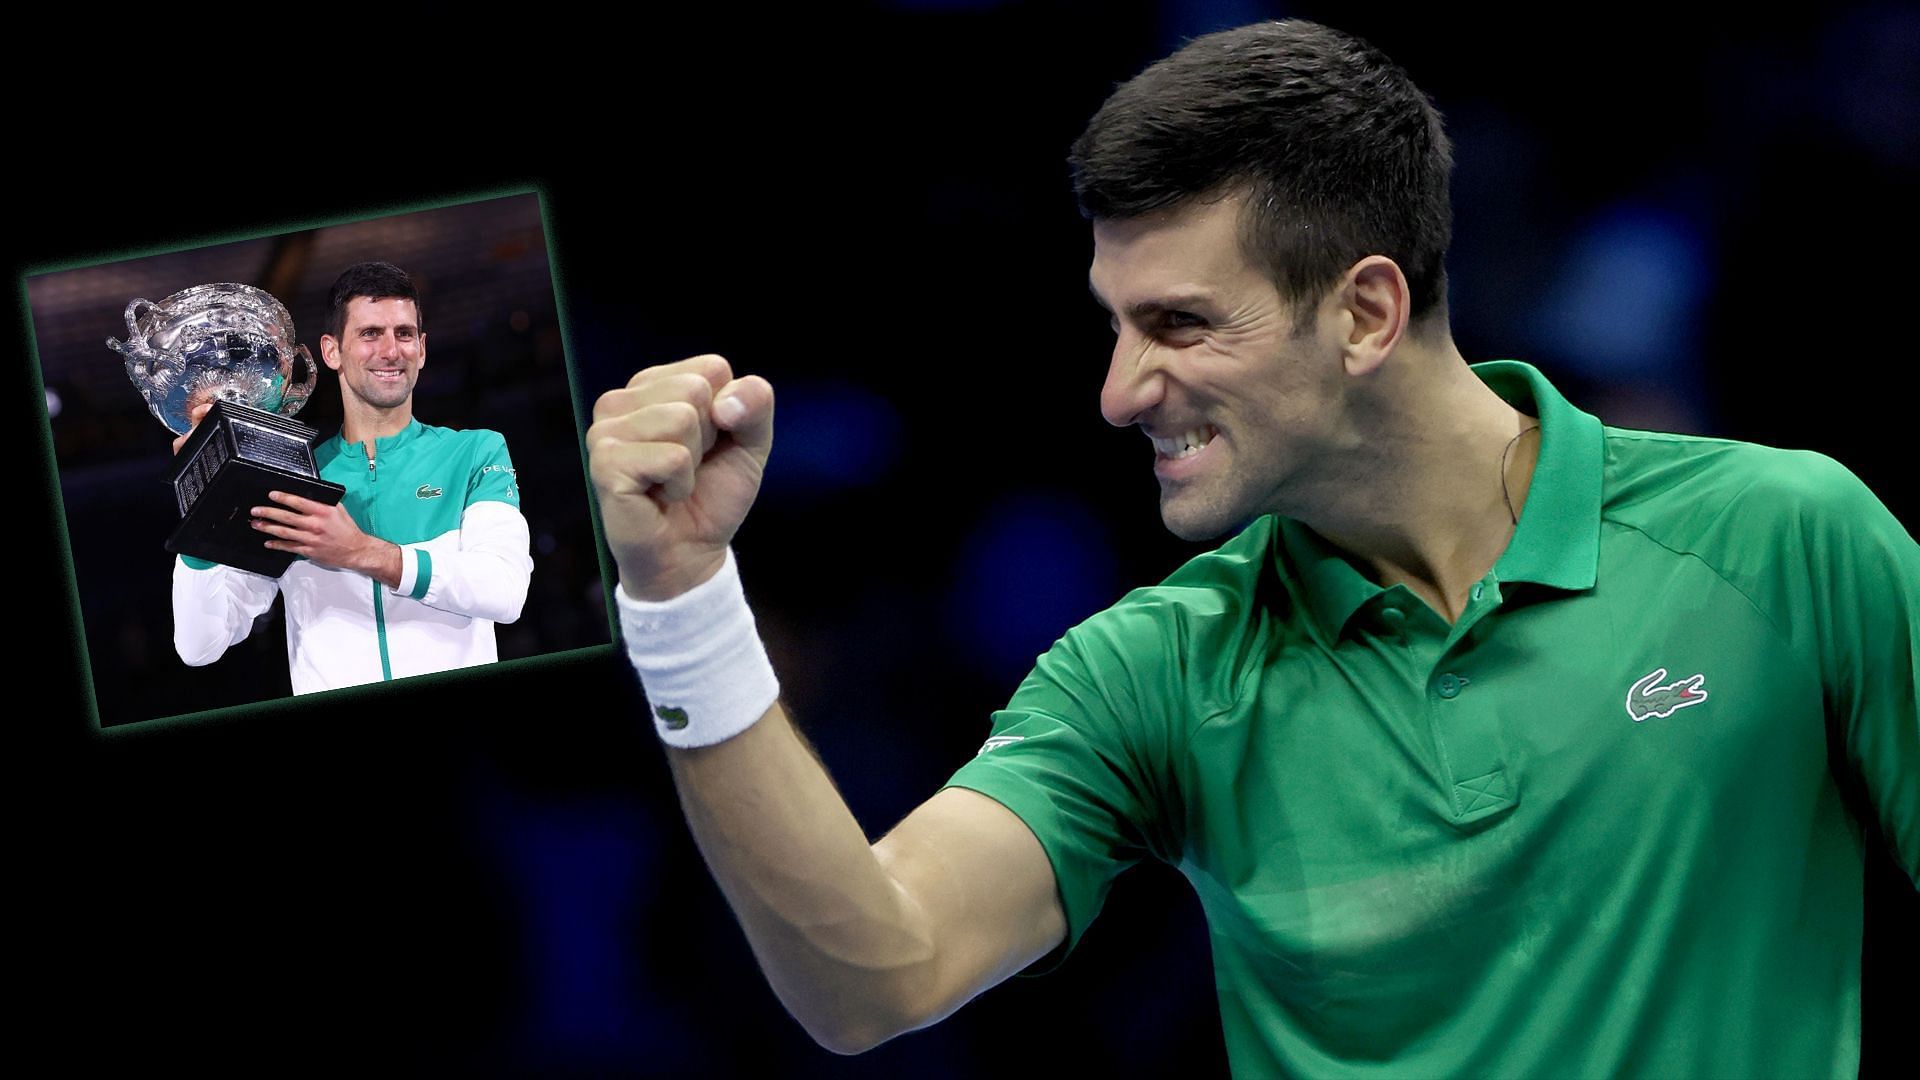 Australia&rsquo;s immigration minister officially confirms news of Novak Djokovic&rsquo;s visa ban overturn